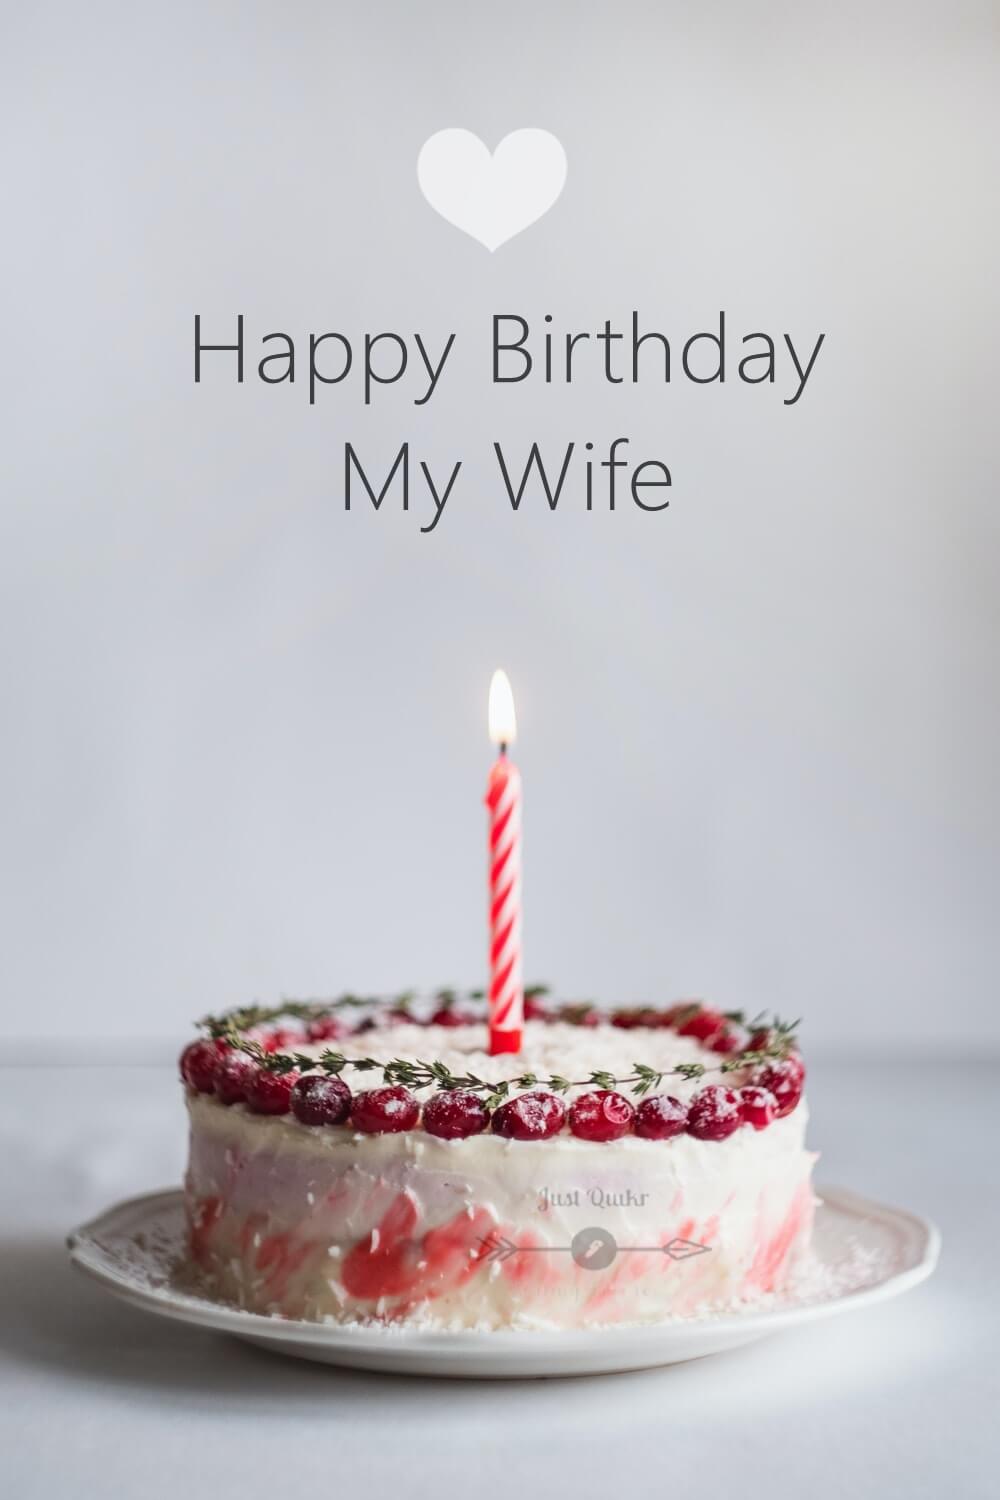 Happy Birthday Wife Wallpapers - Wallpaper Cave